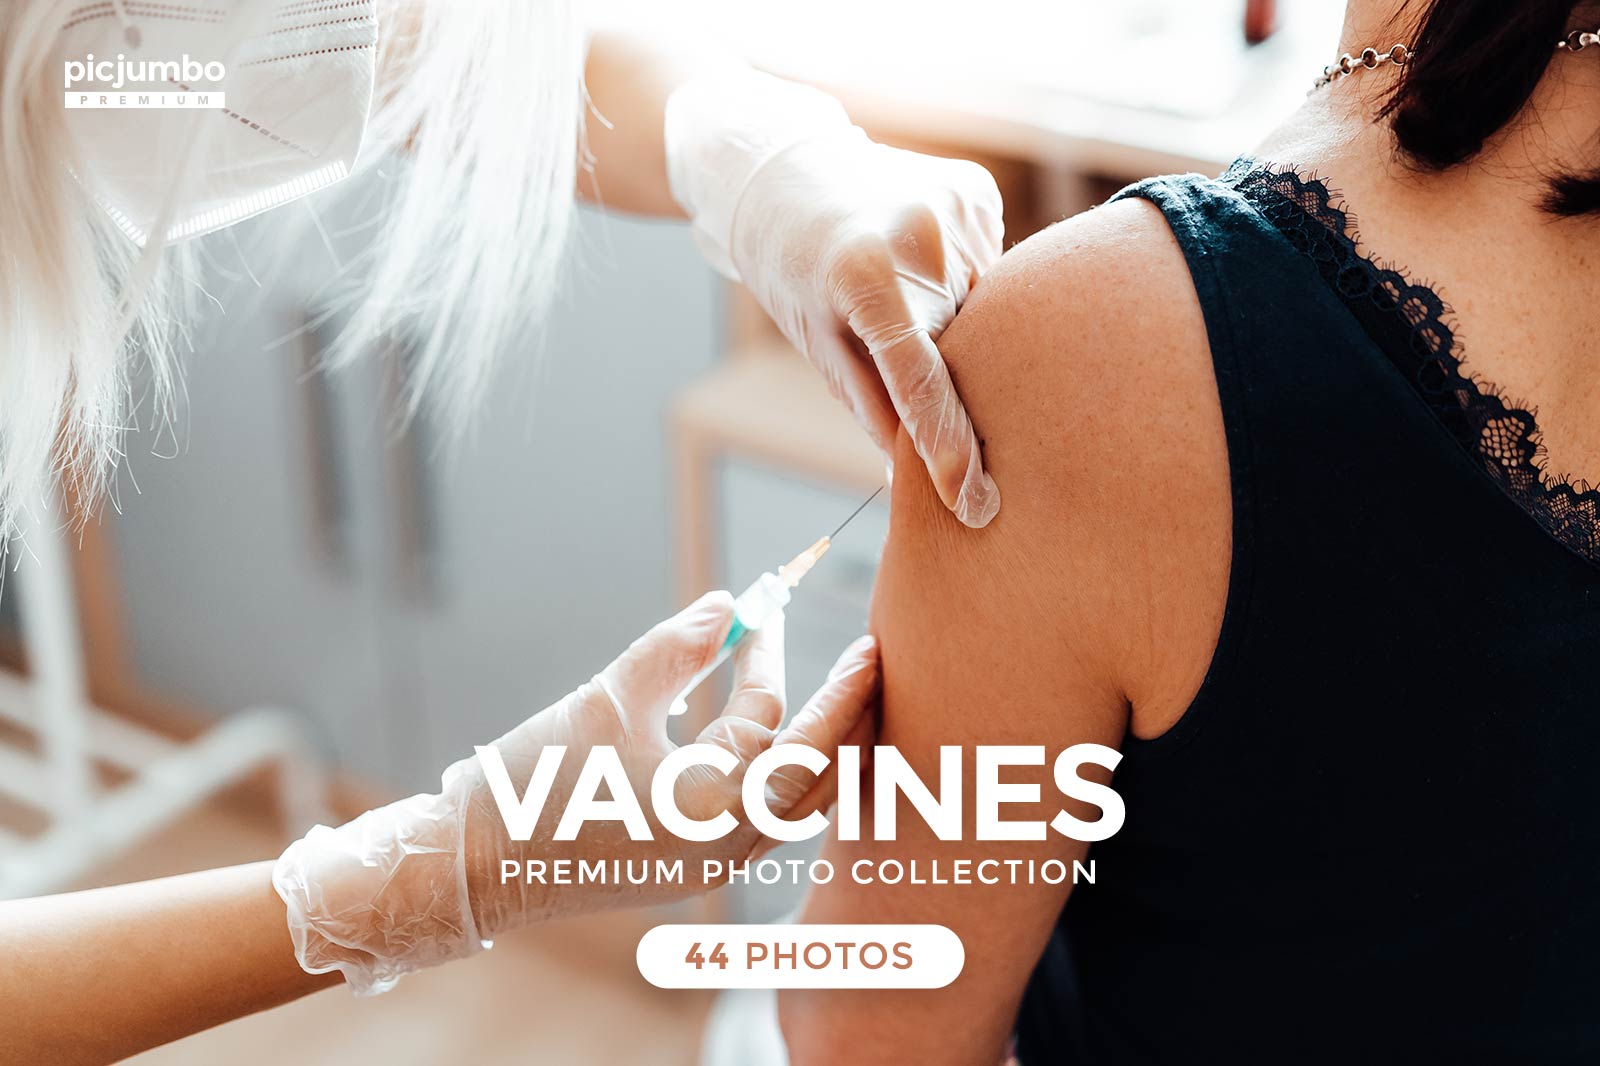 Download hi-res stock photos from our Vaccines PREMIUM Collection!